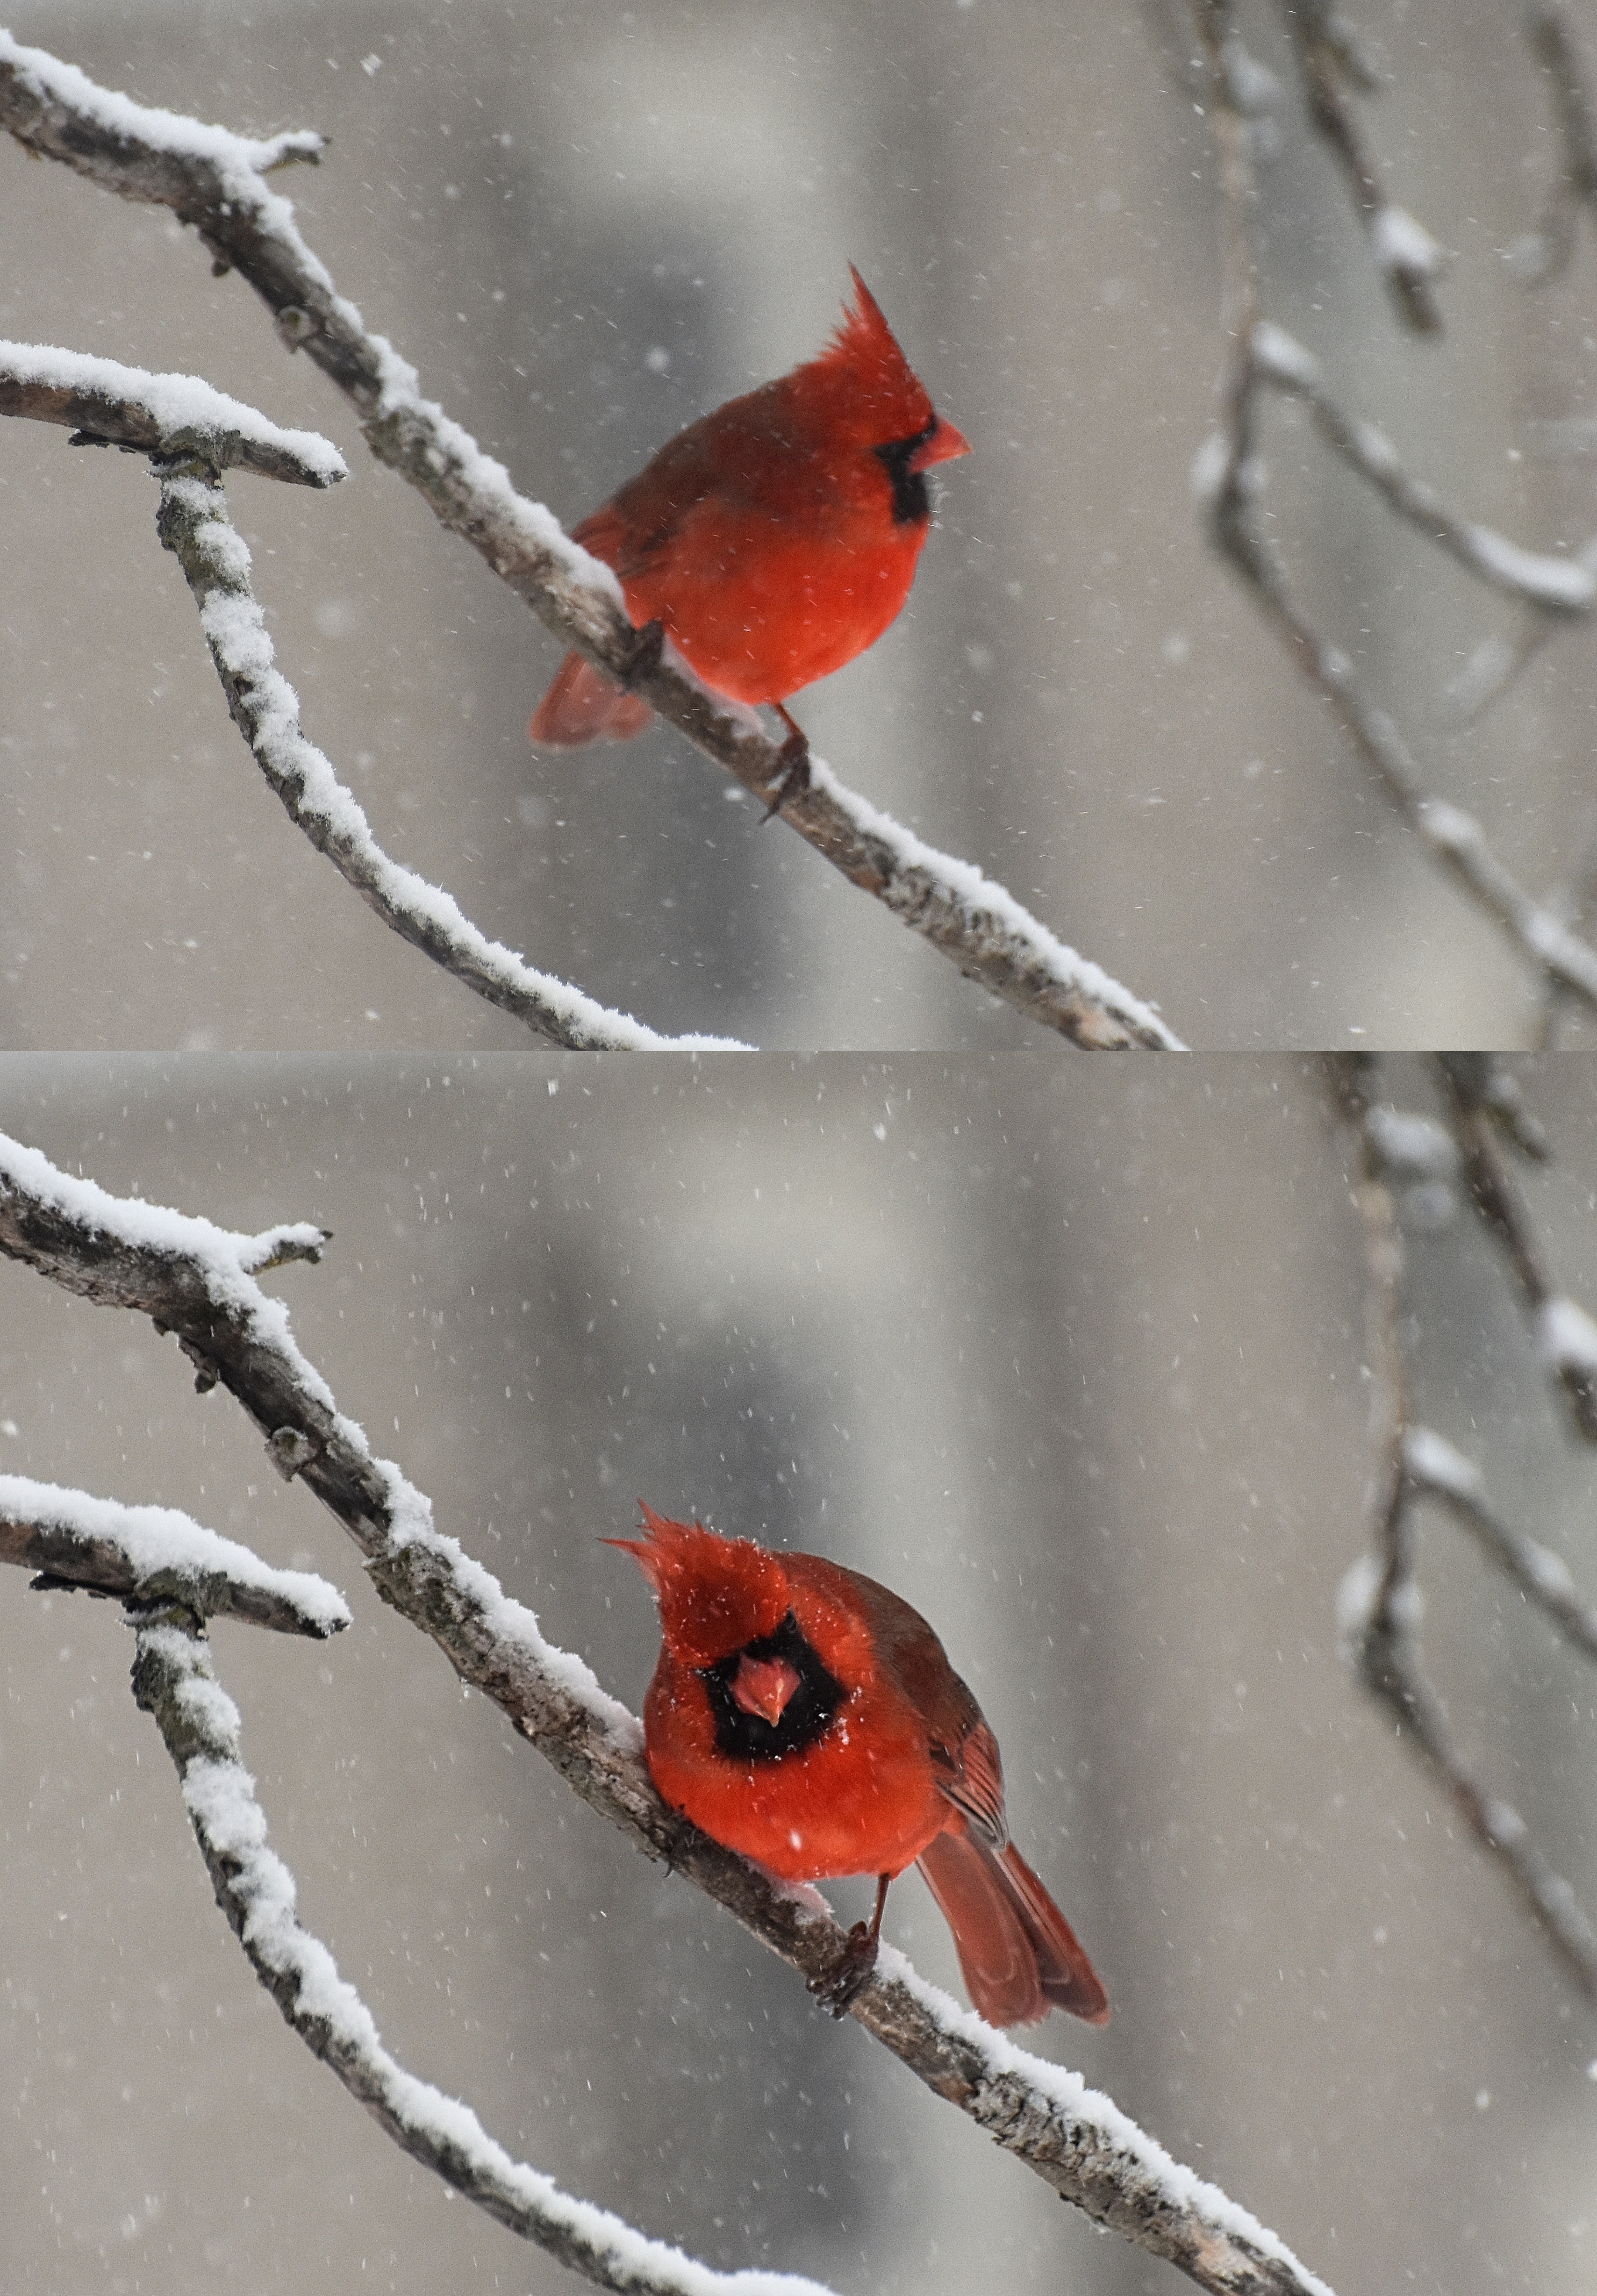 Cardinals in the snow | image tagged in cardinals,snow,kewlew | made w/ Imgflip meme maker